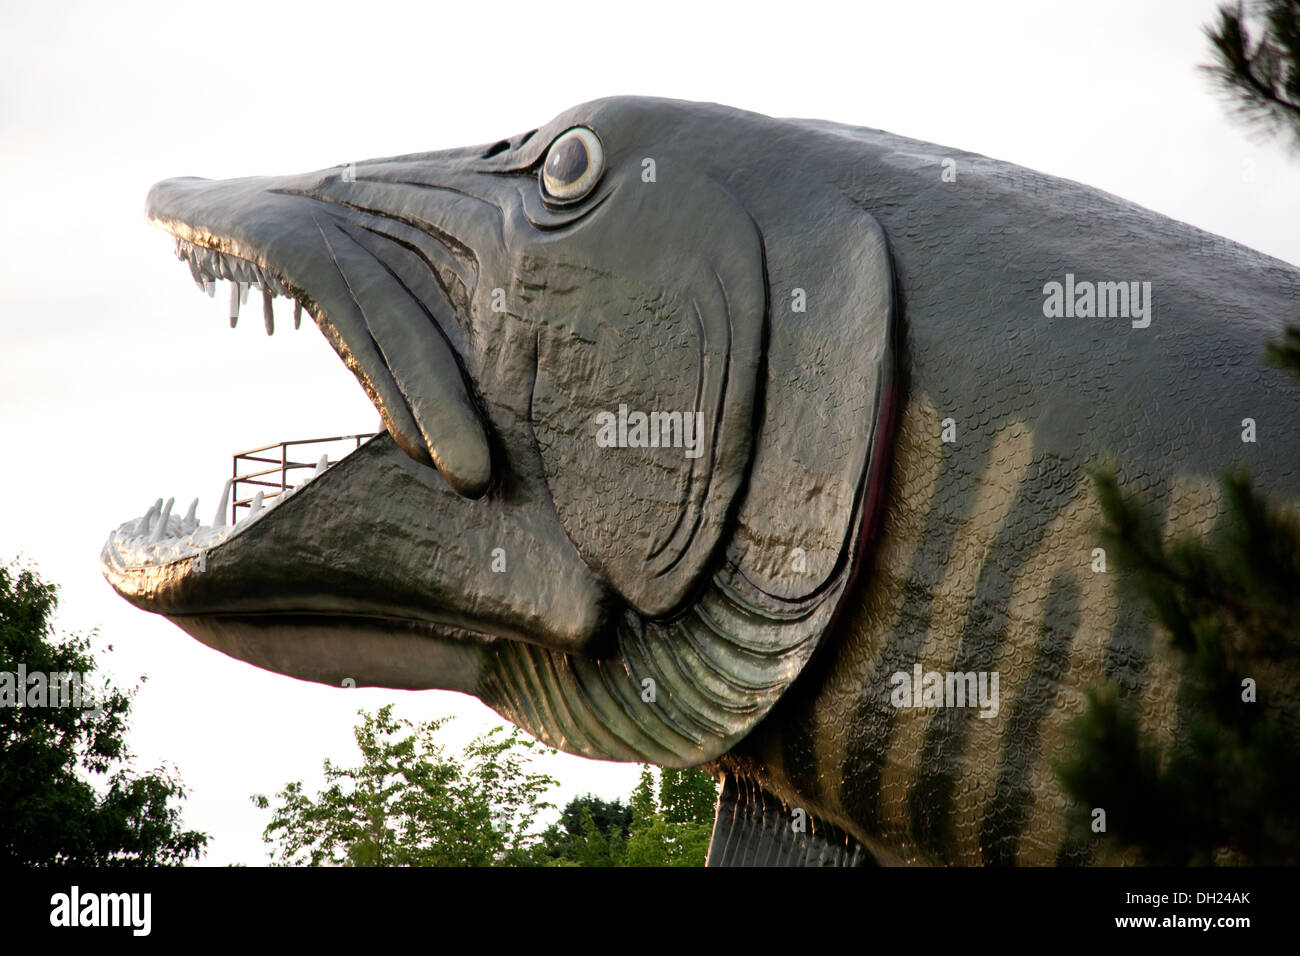 Giant muskellunge fish sculpture with mouth viewing station. Fresh